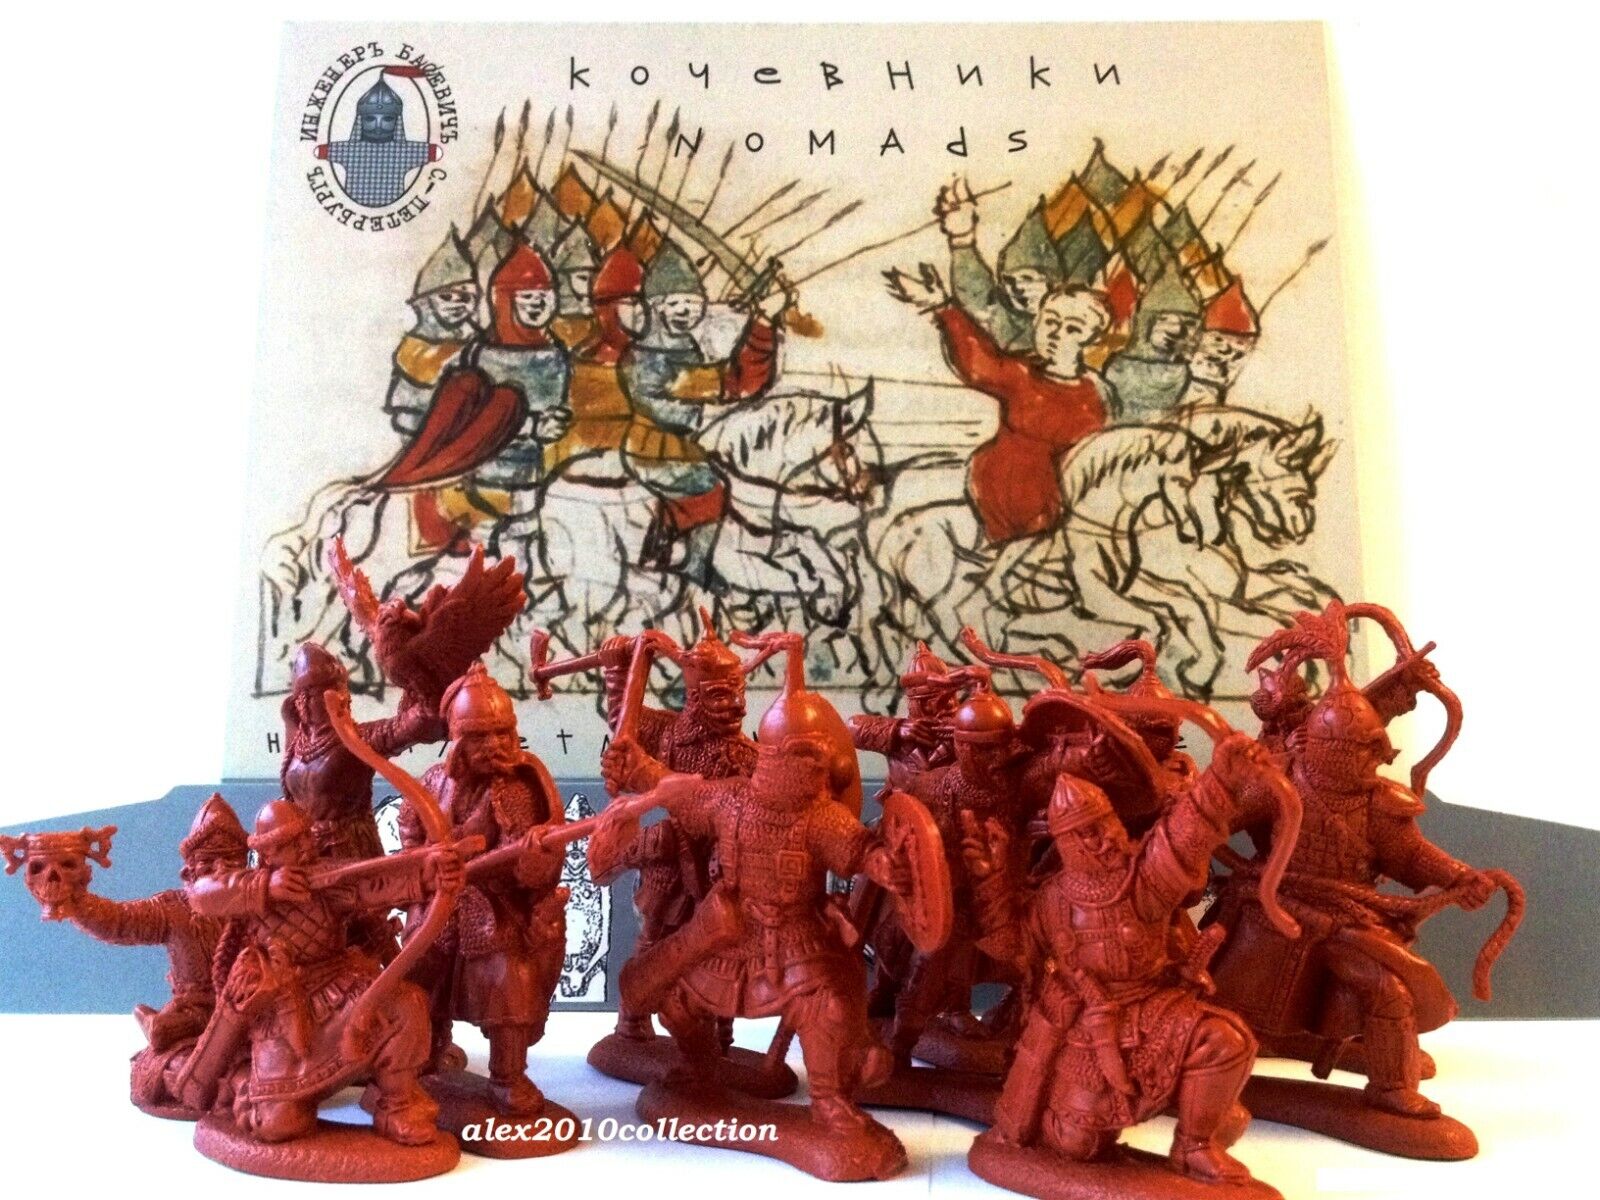 Engineer Basevich,  Nomads, 1/32 scale unpainted, collectible 12 nomads figures